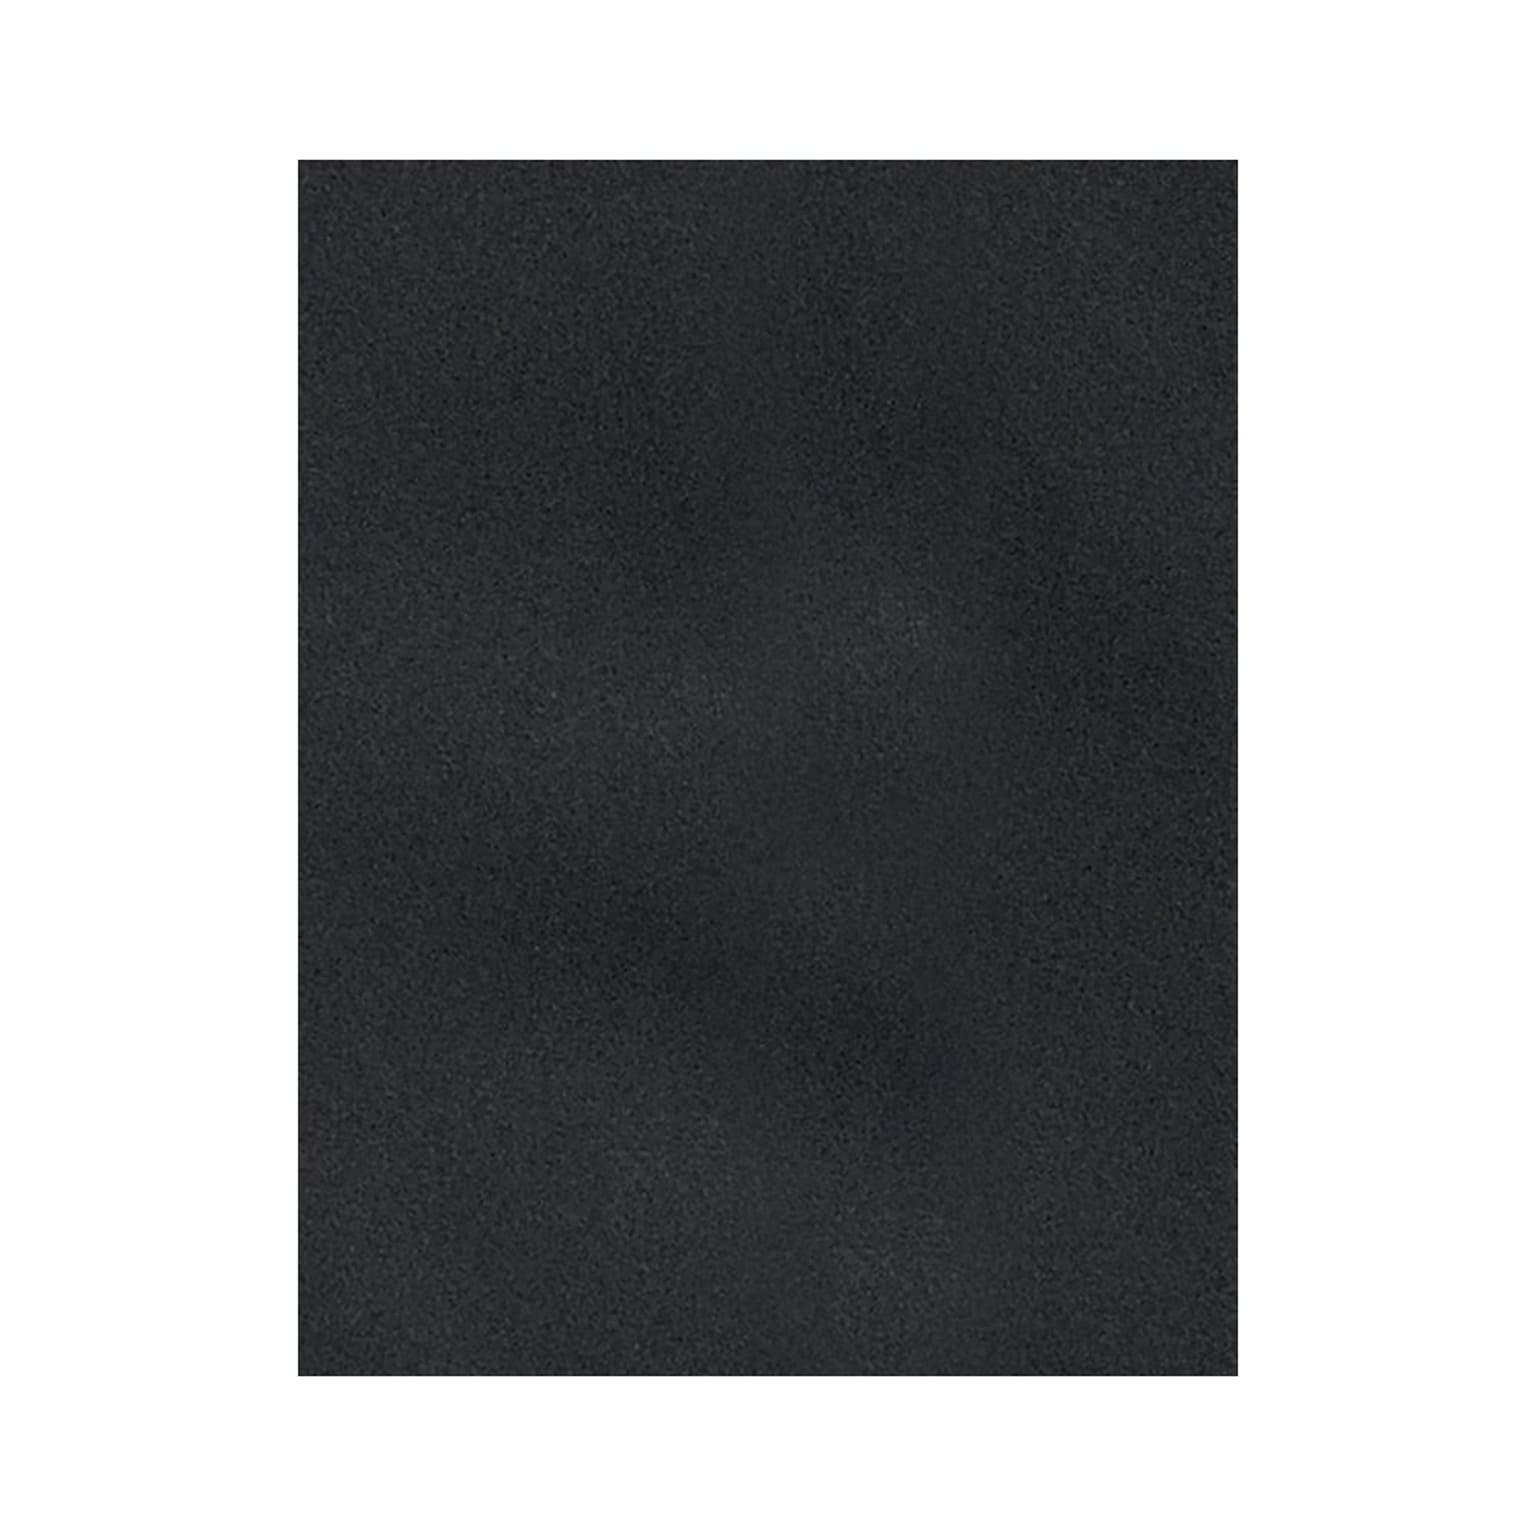 Lux Cardstock 8.5 x 11 inch, Midnight Black 250/Pack